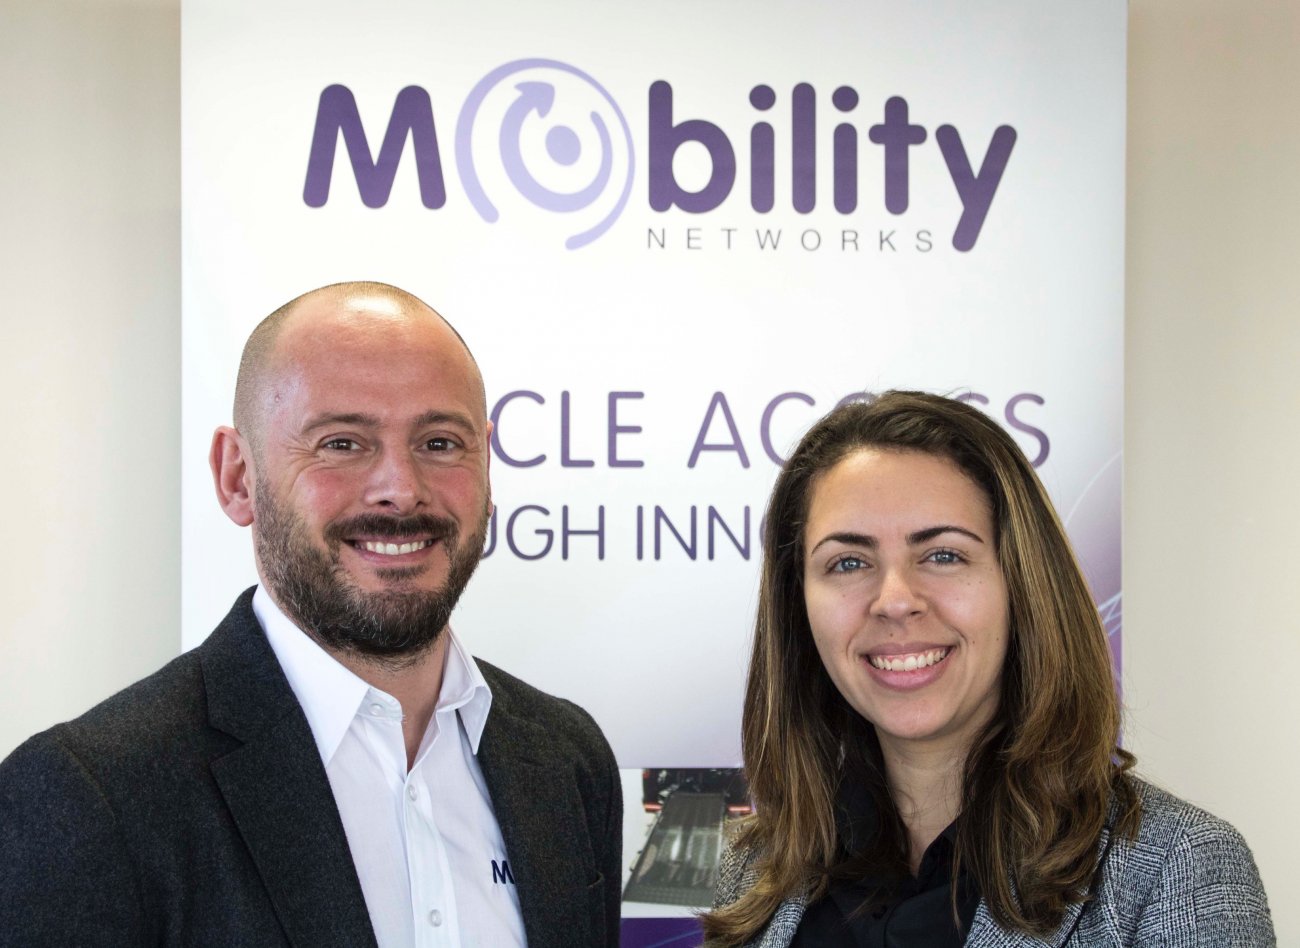 Mobility Networks continues to attract new talent in the industry